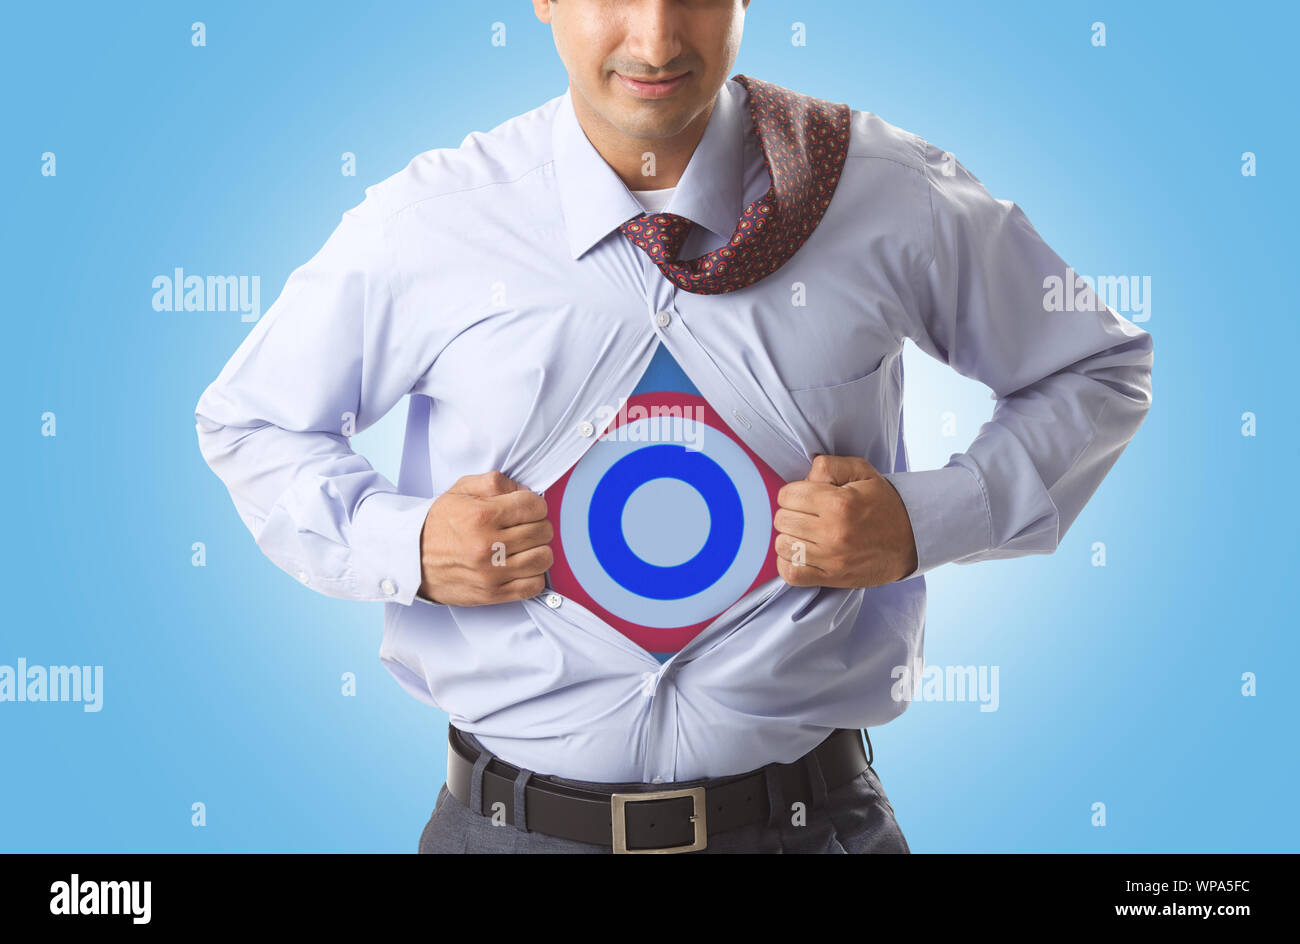 Super businessman tearing up his shirt to reveal dartboard on chest Stock Photo